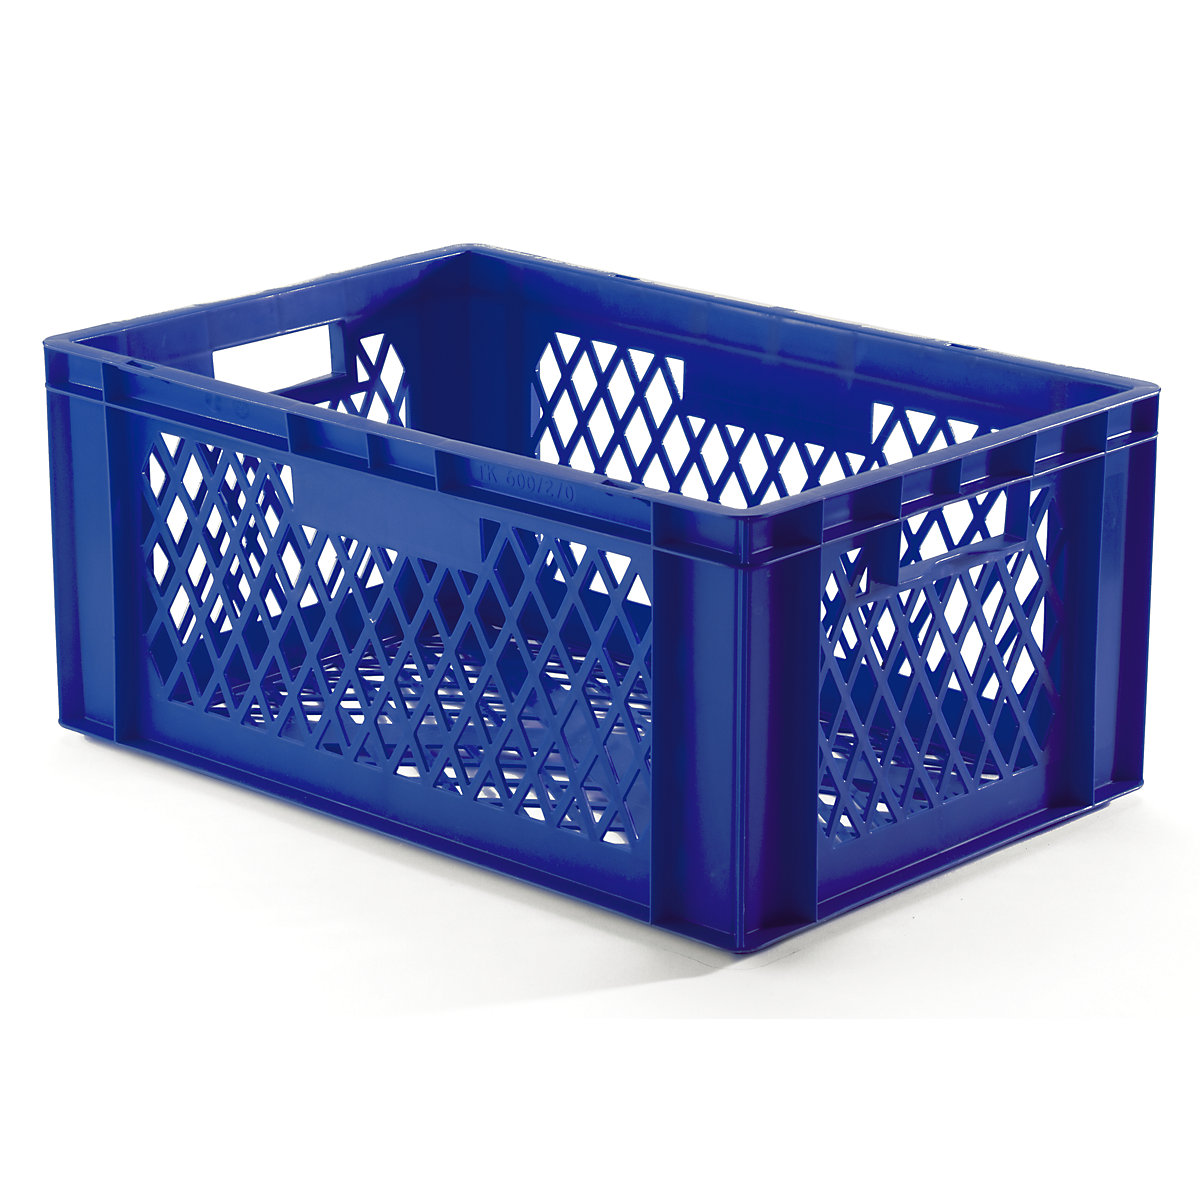 Euro stacking container, perforated walls and base, LxWxH 600 x 400 x 270 mm, blue, pack of 5